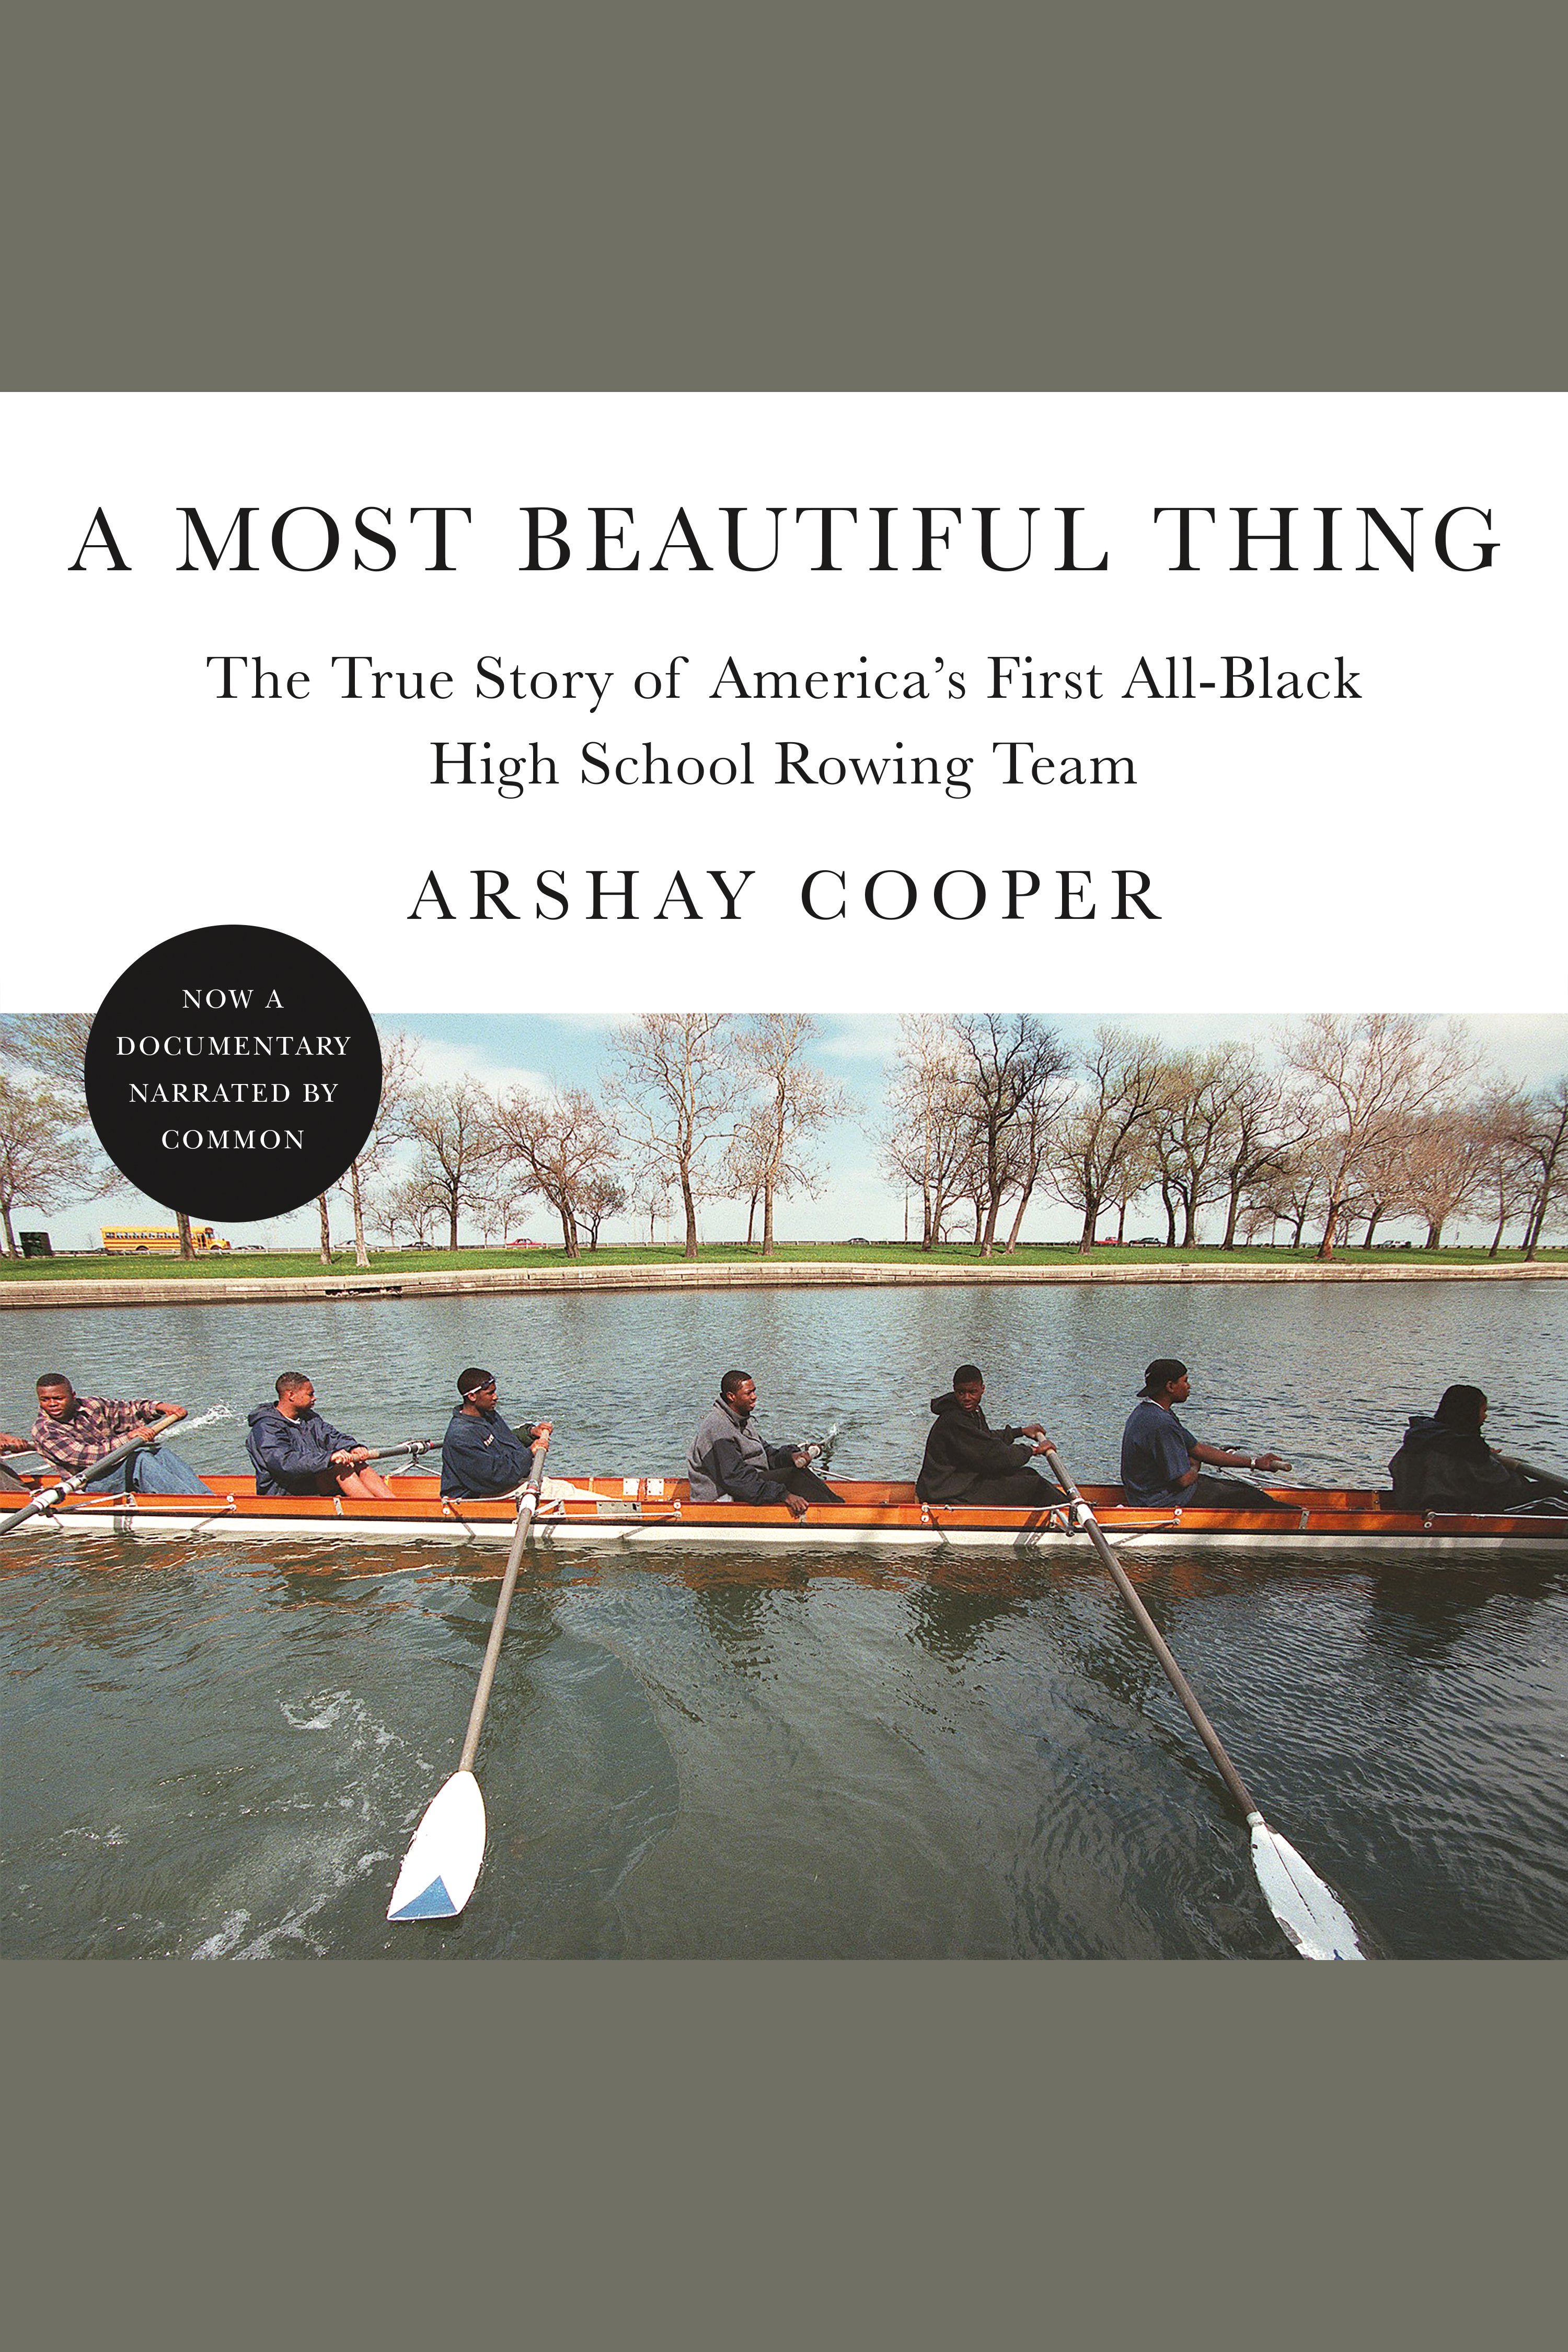 Umschlagbild für Most Beautiful Thing, A [electronic resource] : The True Story of America's First All-Black High School Rowing Team